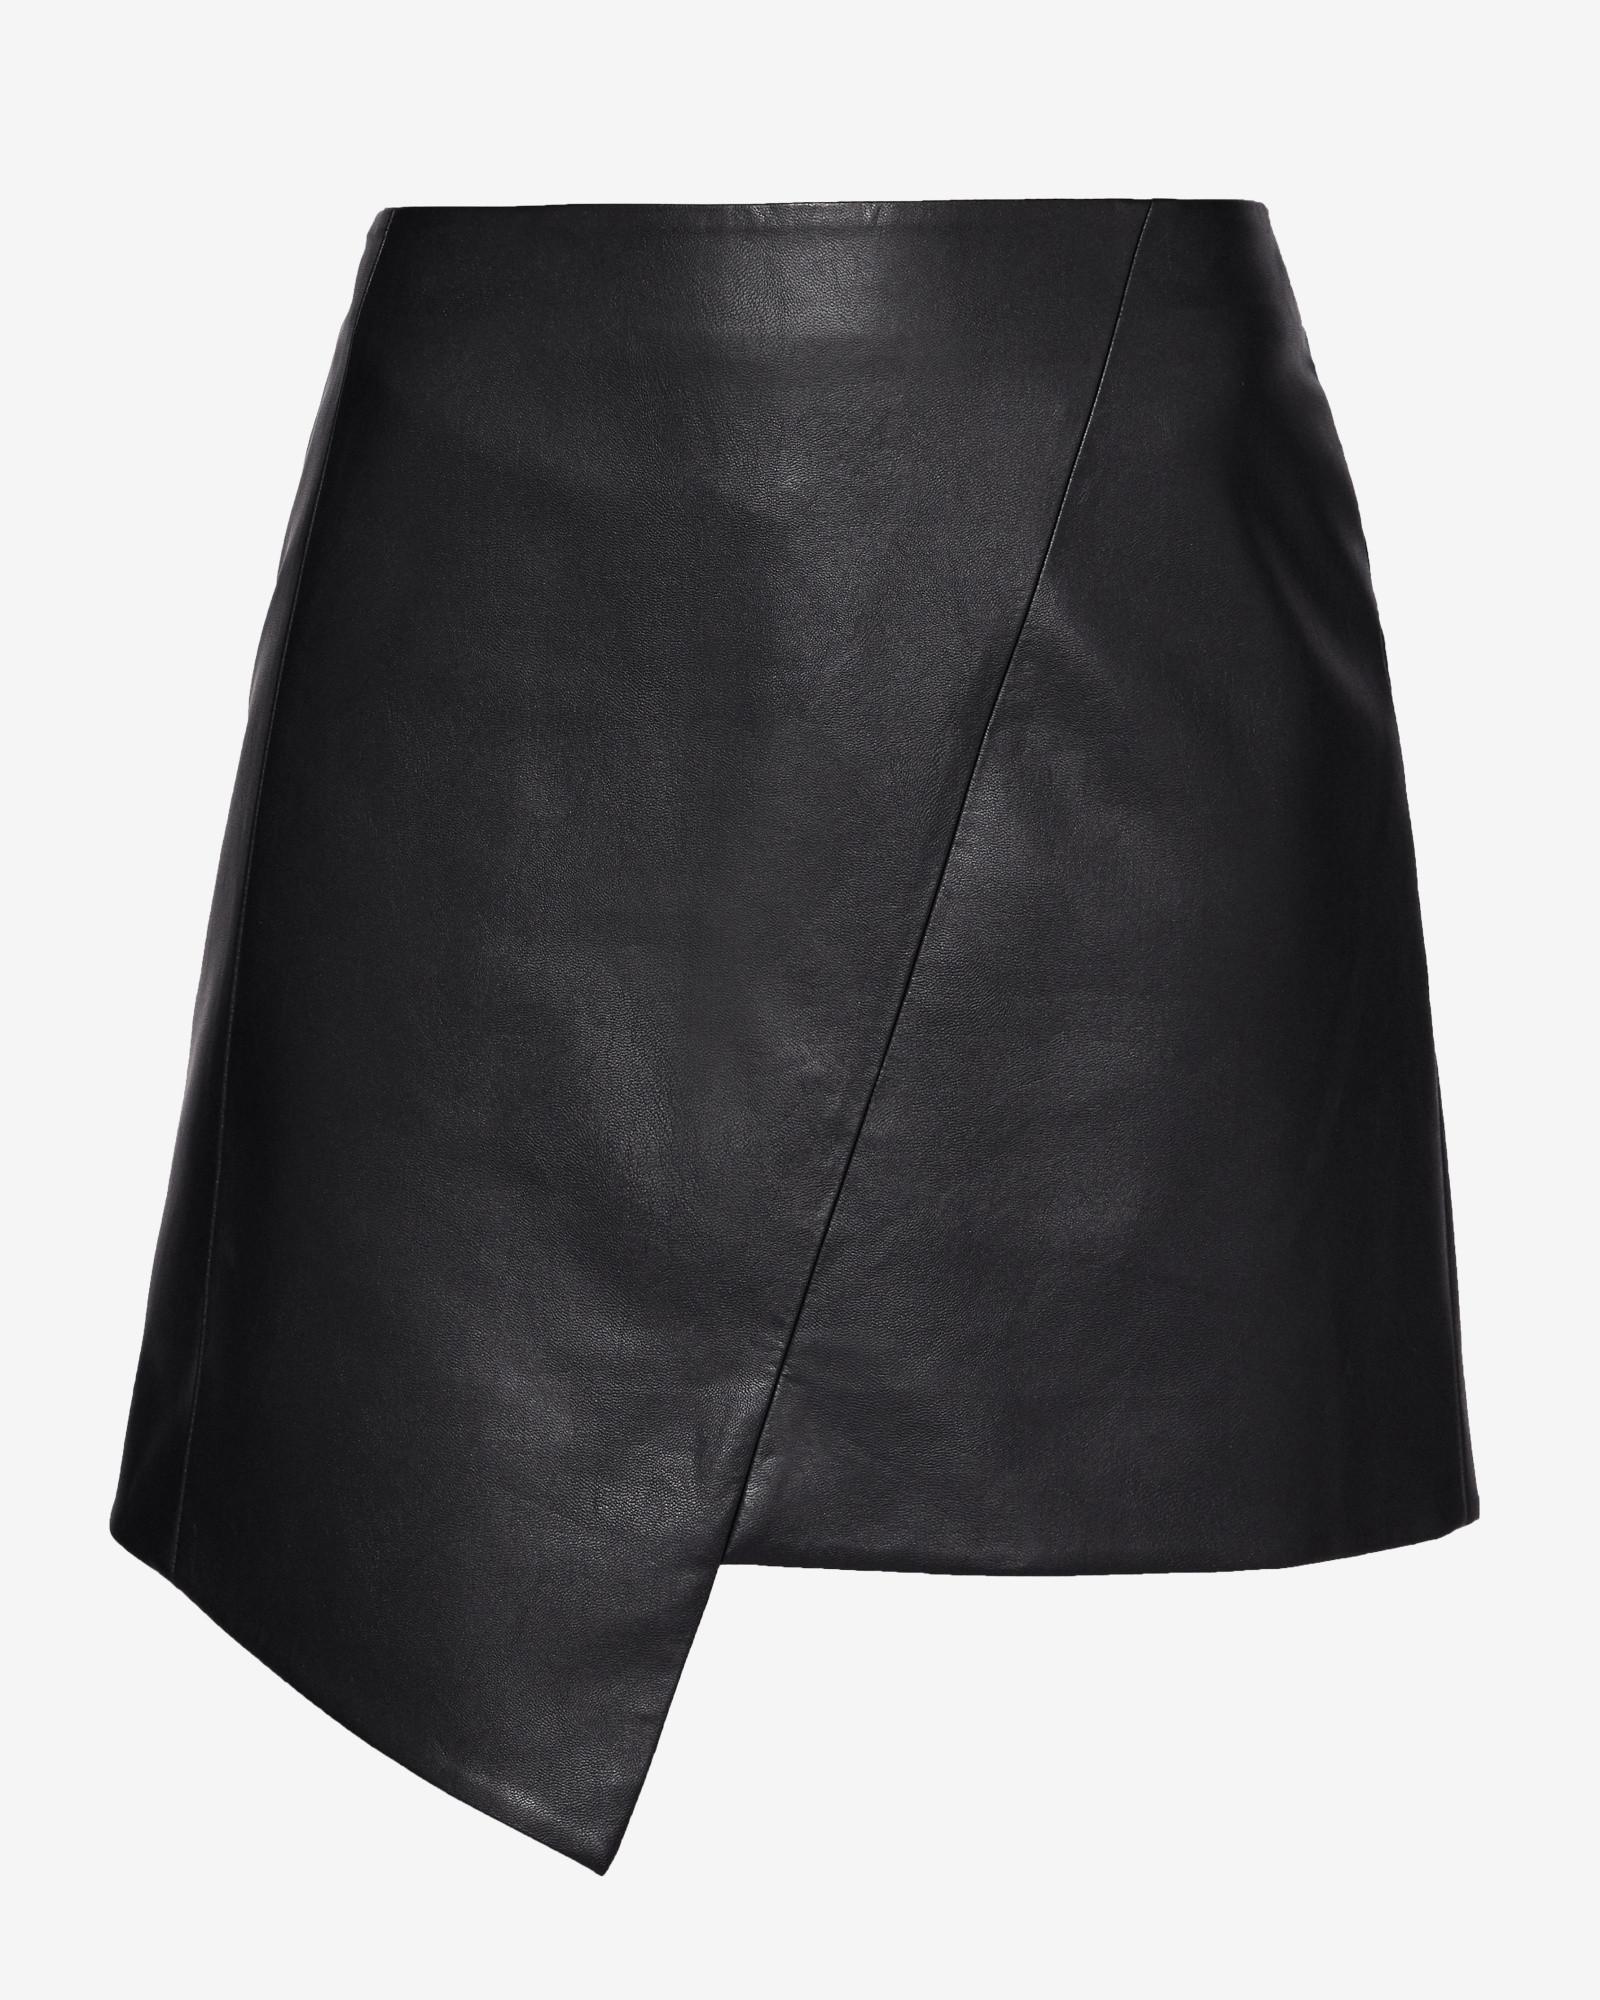 Ted Baker Synthetic Oolive Faux Leather Skirt in Black - Lyst